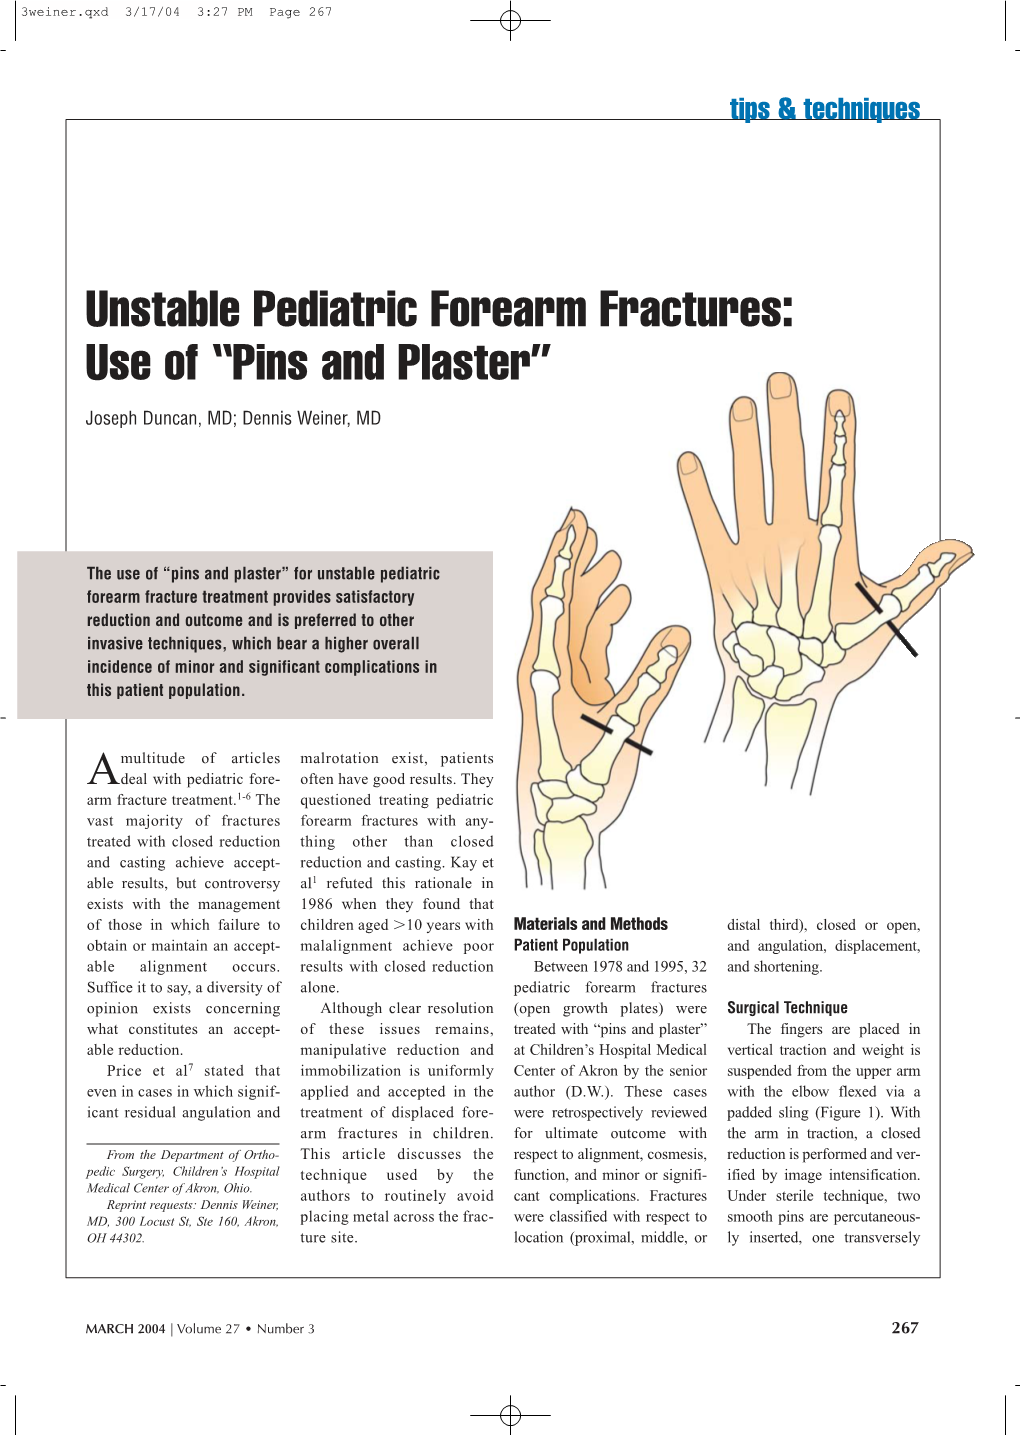 Unstable Pediatric Forearm Fractures: Use of “Pins and Plaster”